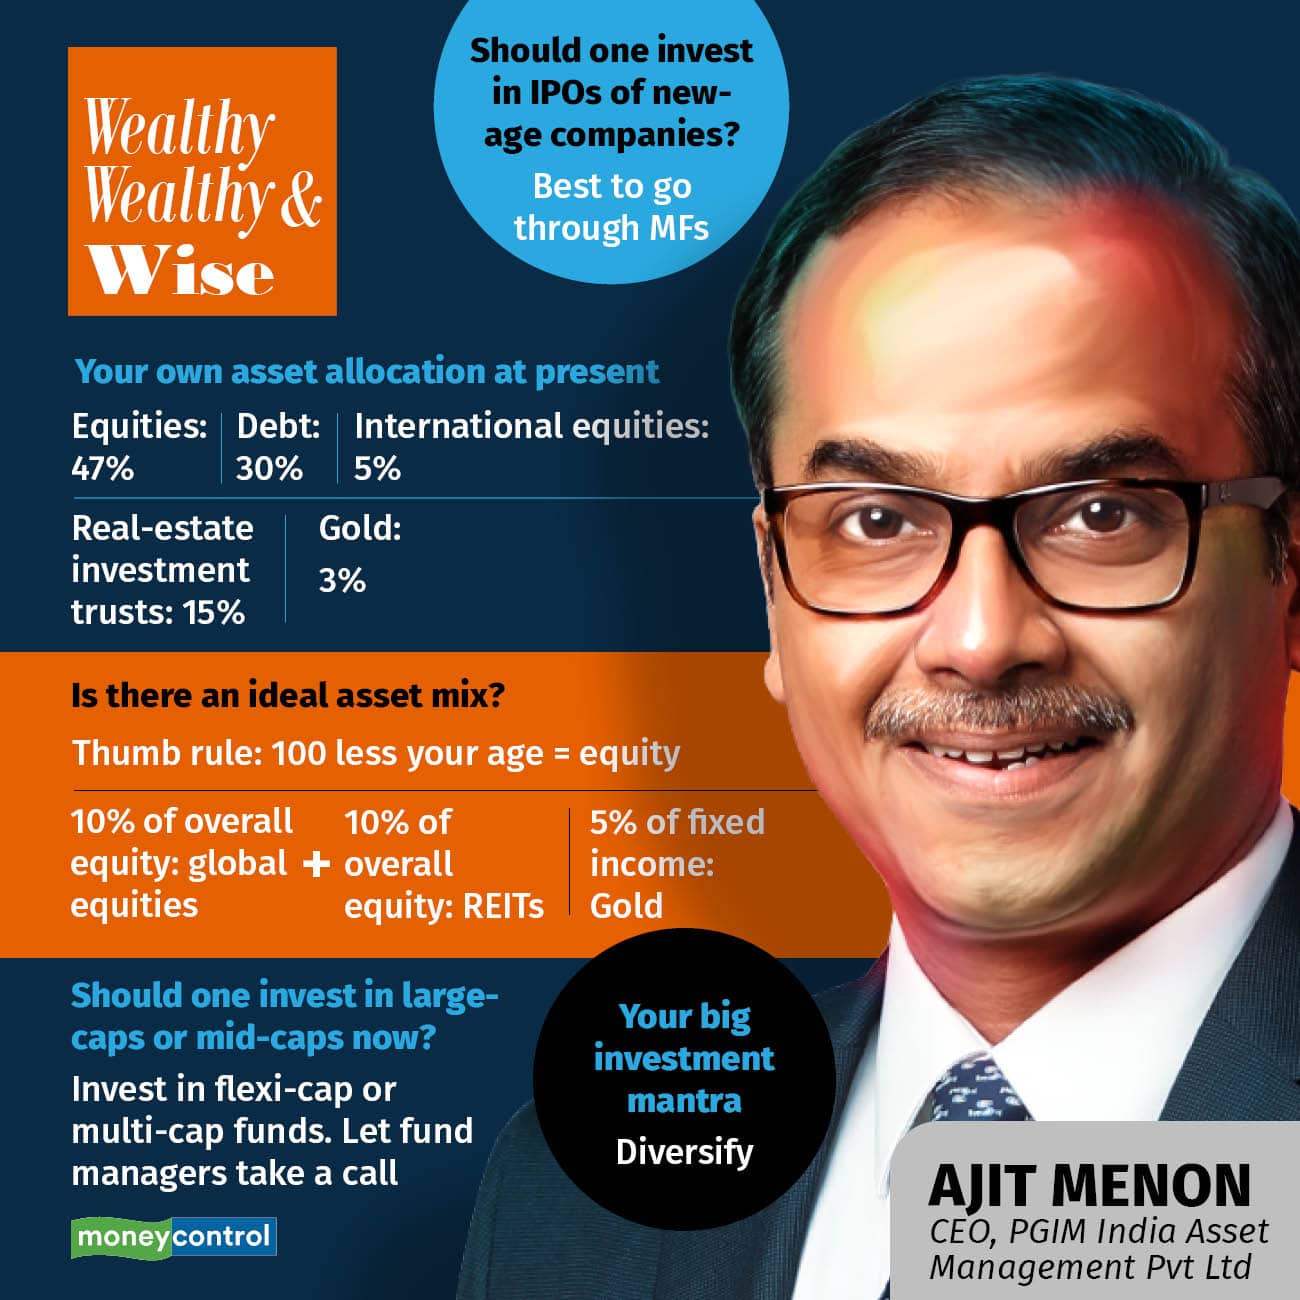 Ajit Menon, chief executive officer of PGIM India Mutual Fund, says investing must continue, irrespective of market levels